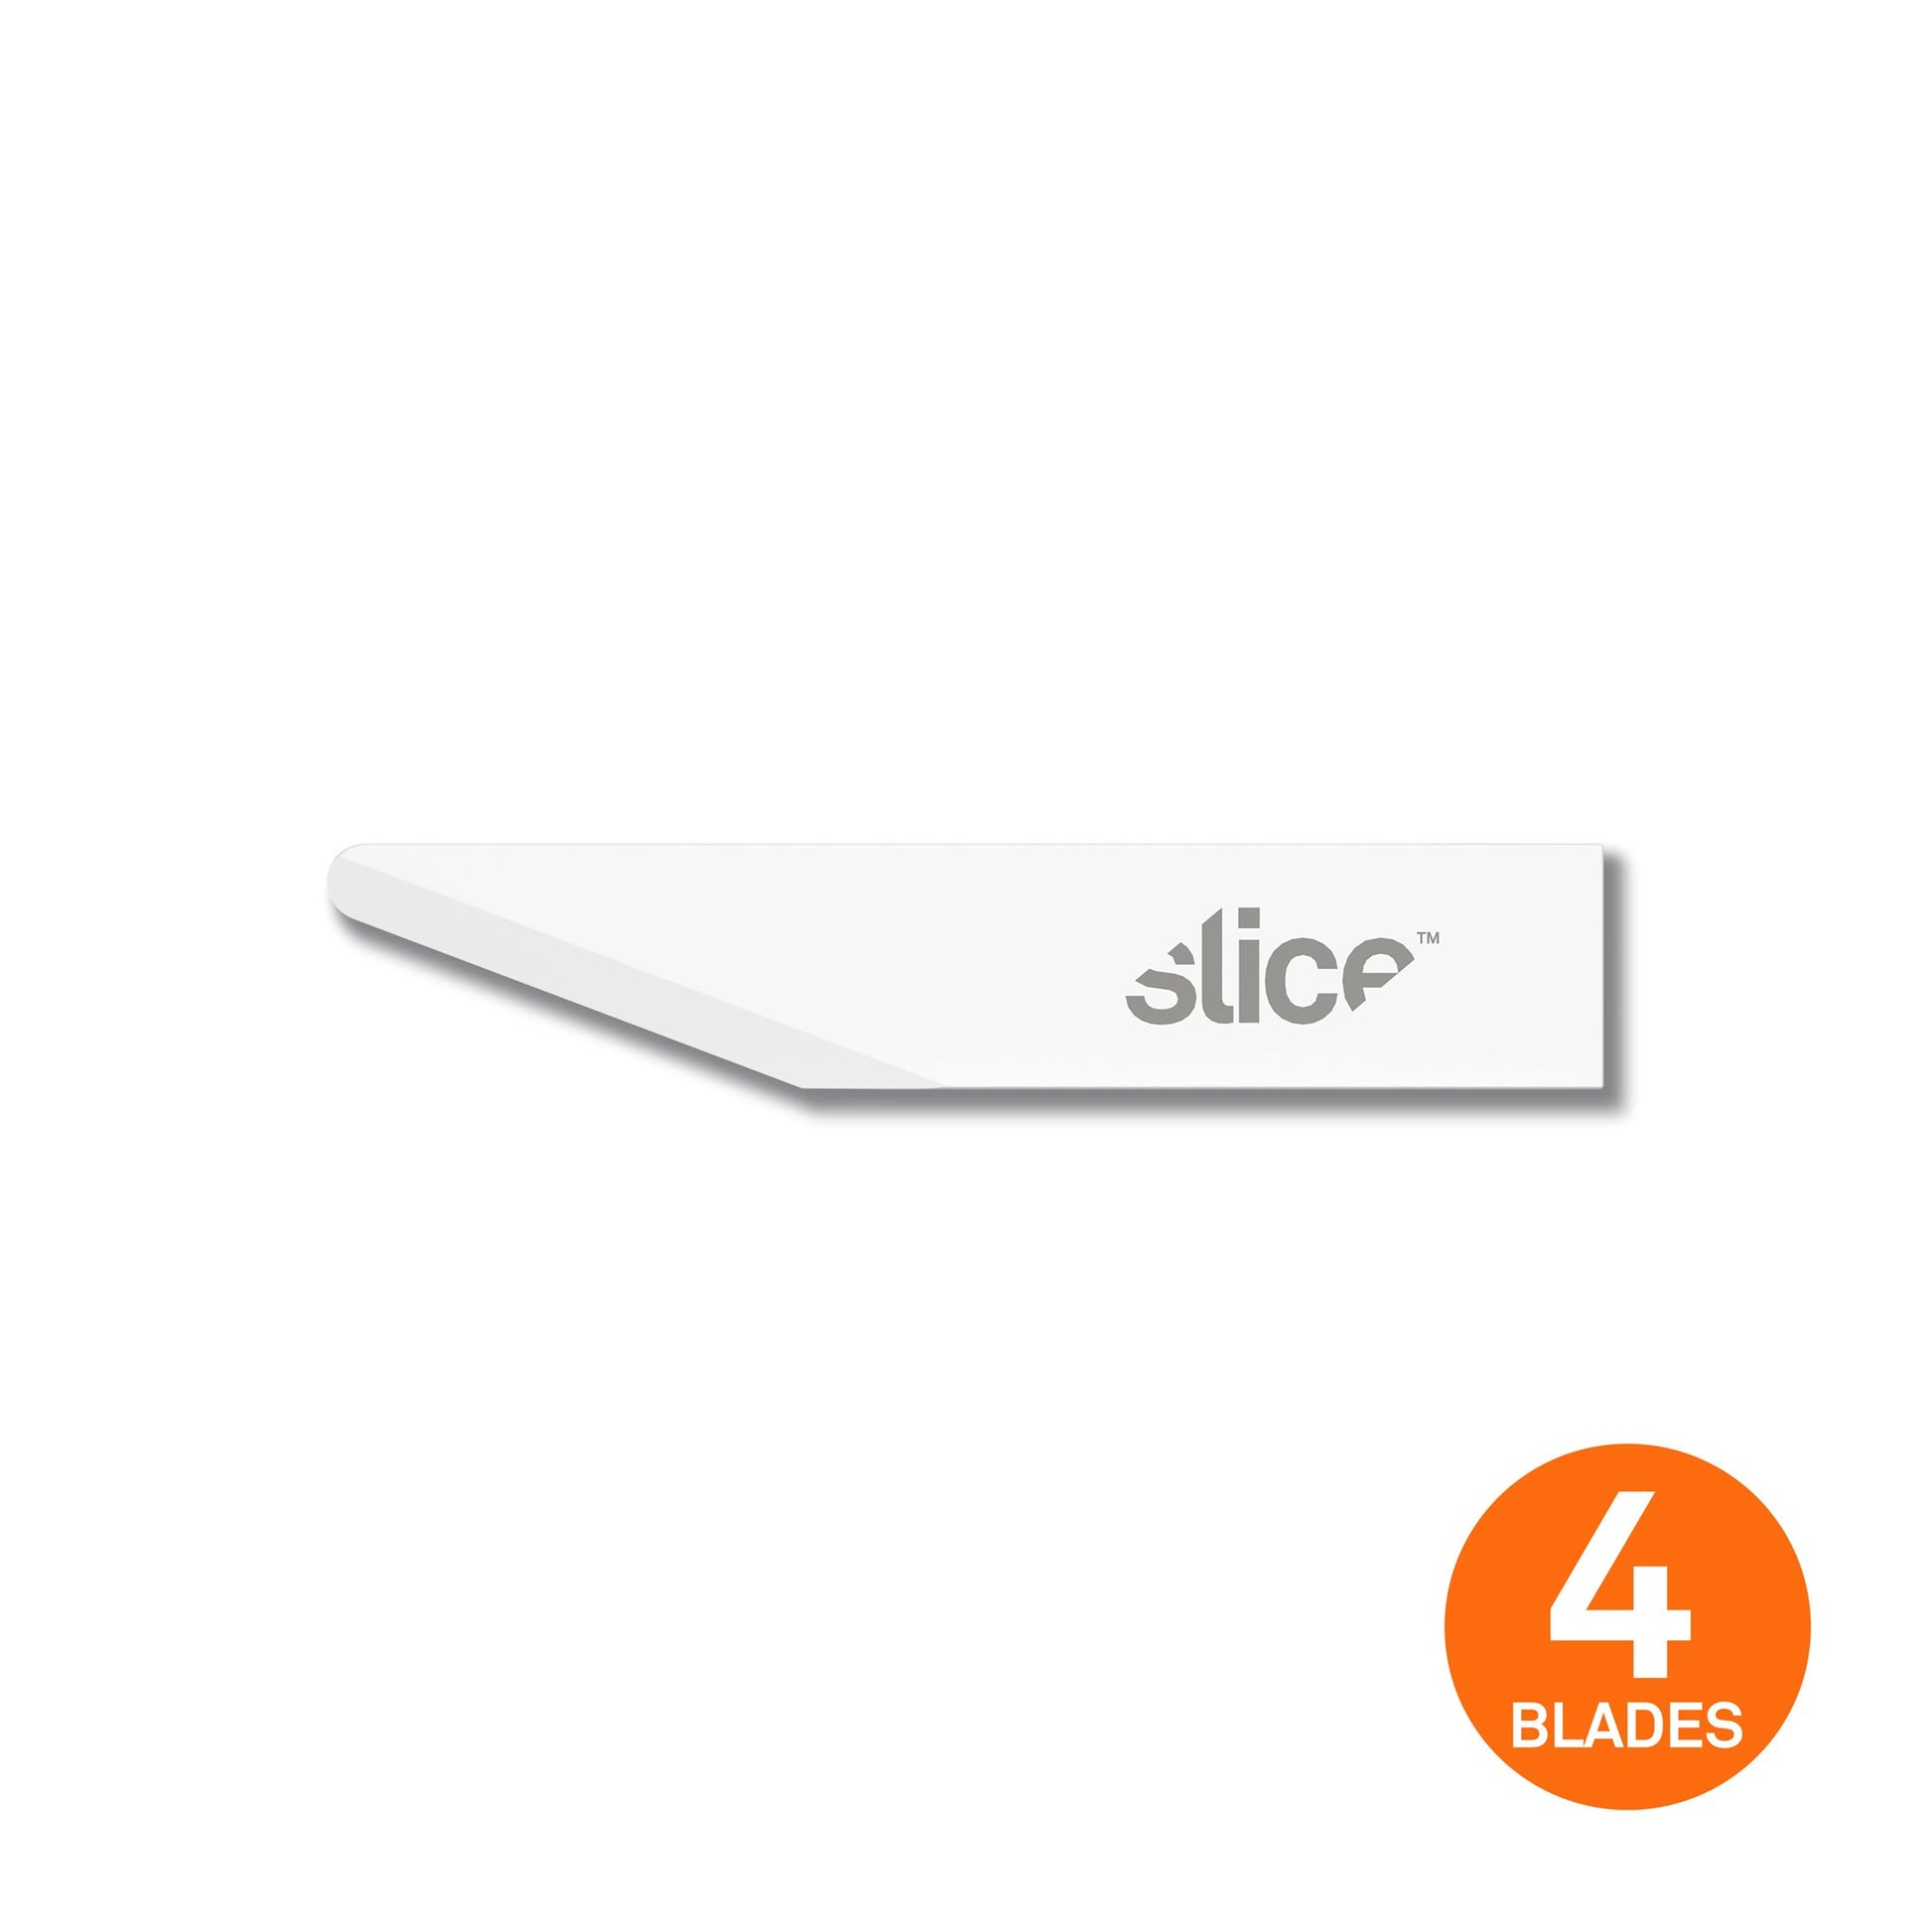 The Slice® 10518 Craft Blades with straight edges and rounded tips